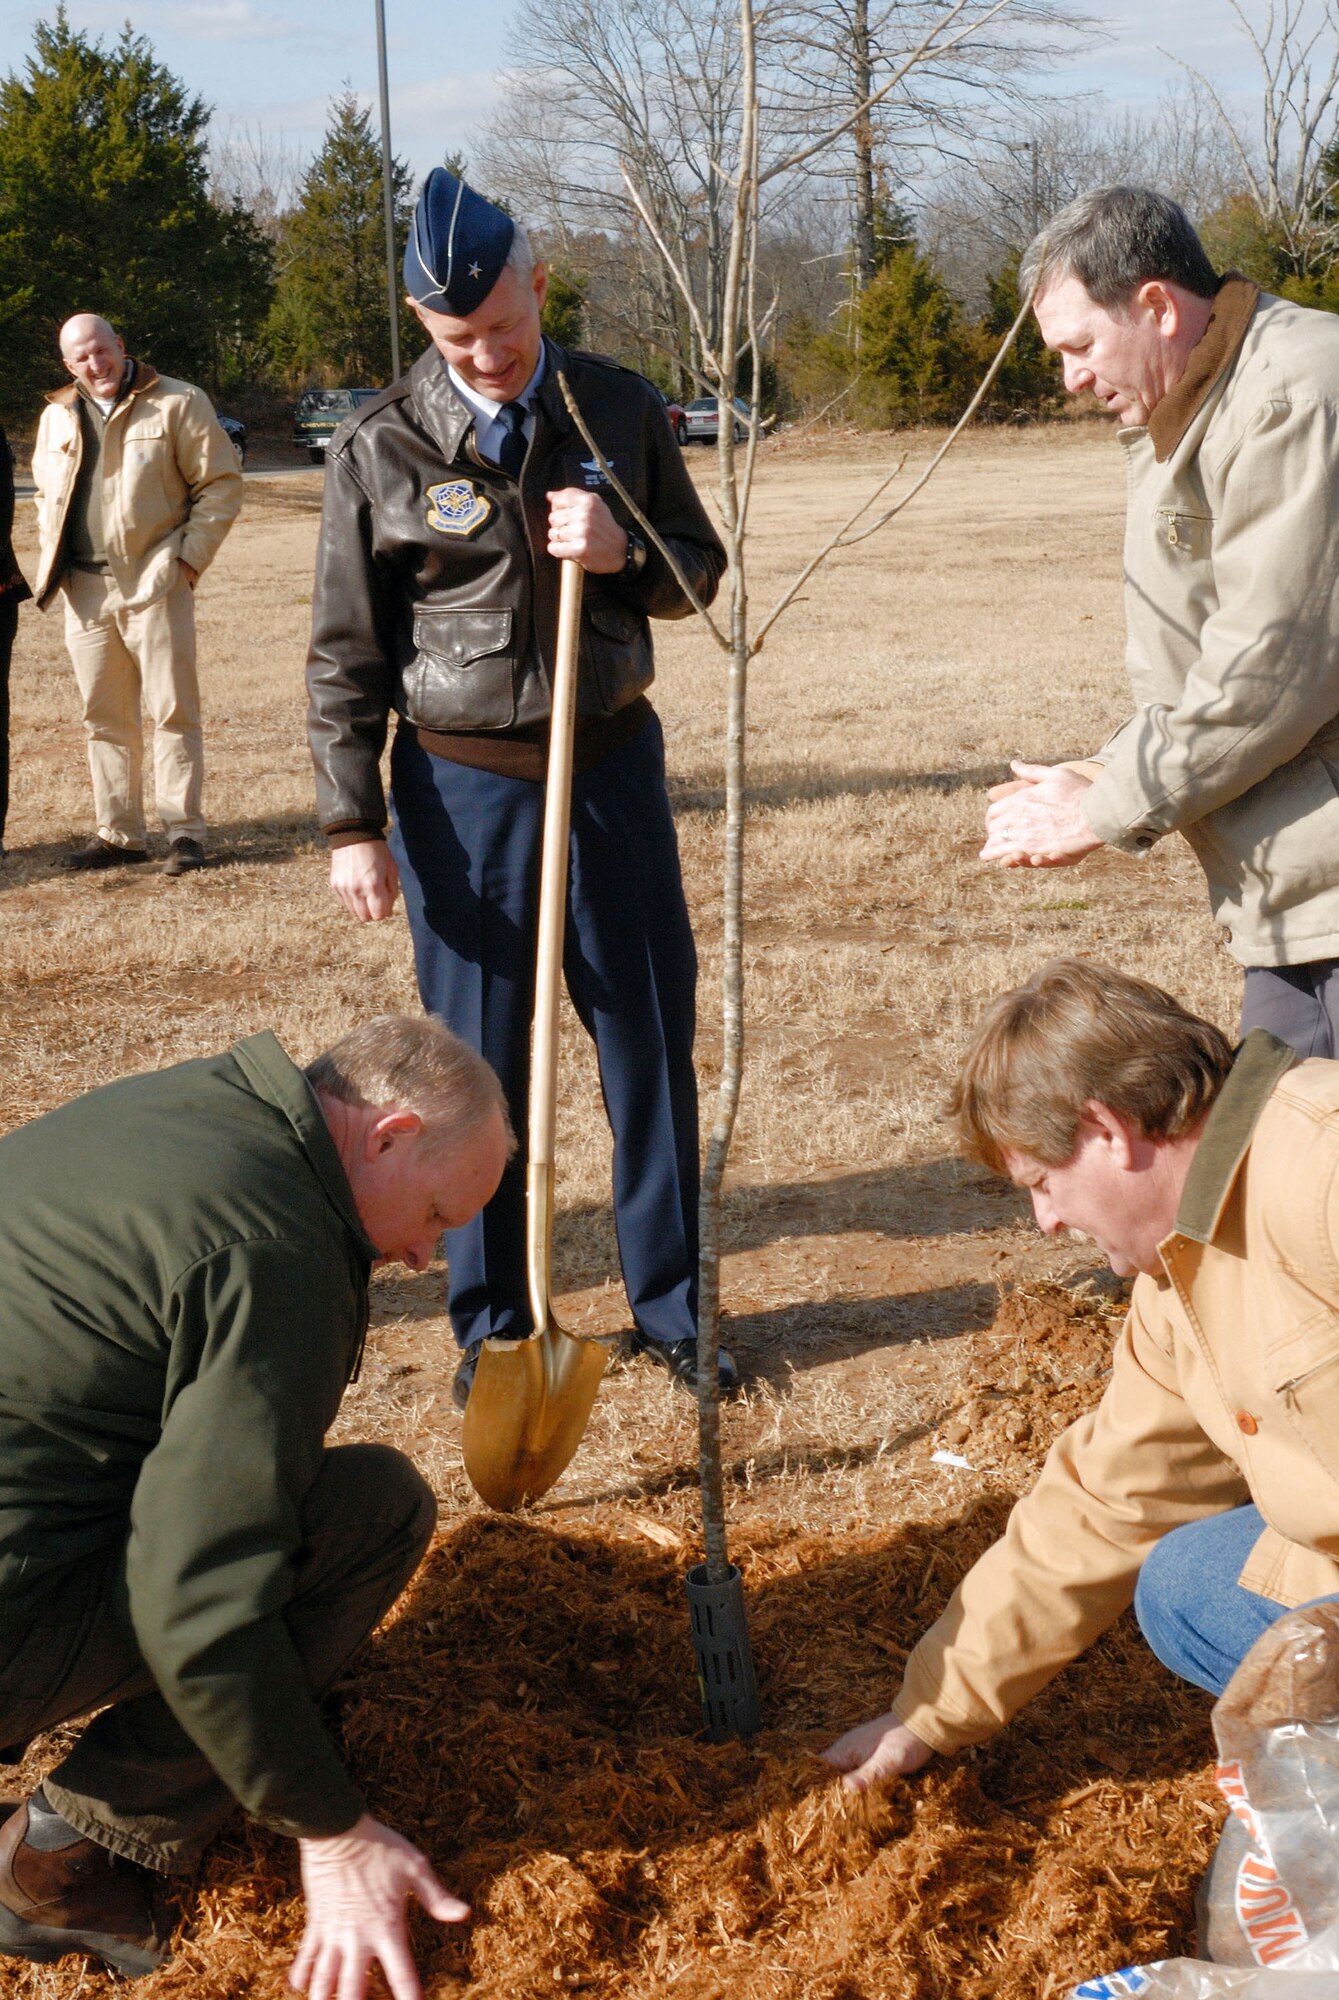 Brig. Gen. Rowayne A. Schatz Jr., Larry Nance, Pete Rausch and James Popham plant a tree for the 15th Annual Arbor Day ceremony Dec. 1 at the base child development center at Little Rock Air Force Base, Ark. General Schatz is the 19th Airlift Wing commander, Mr. Nance is the Arkansas deputy state forester, Mr. Rausch is from Tree Health Care, and Mr. Popham is the 19th Civil Engineering Squadron natural resources manager. (U.S. Air Force photo/Senior Airman Christine Clark) 